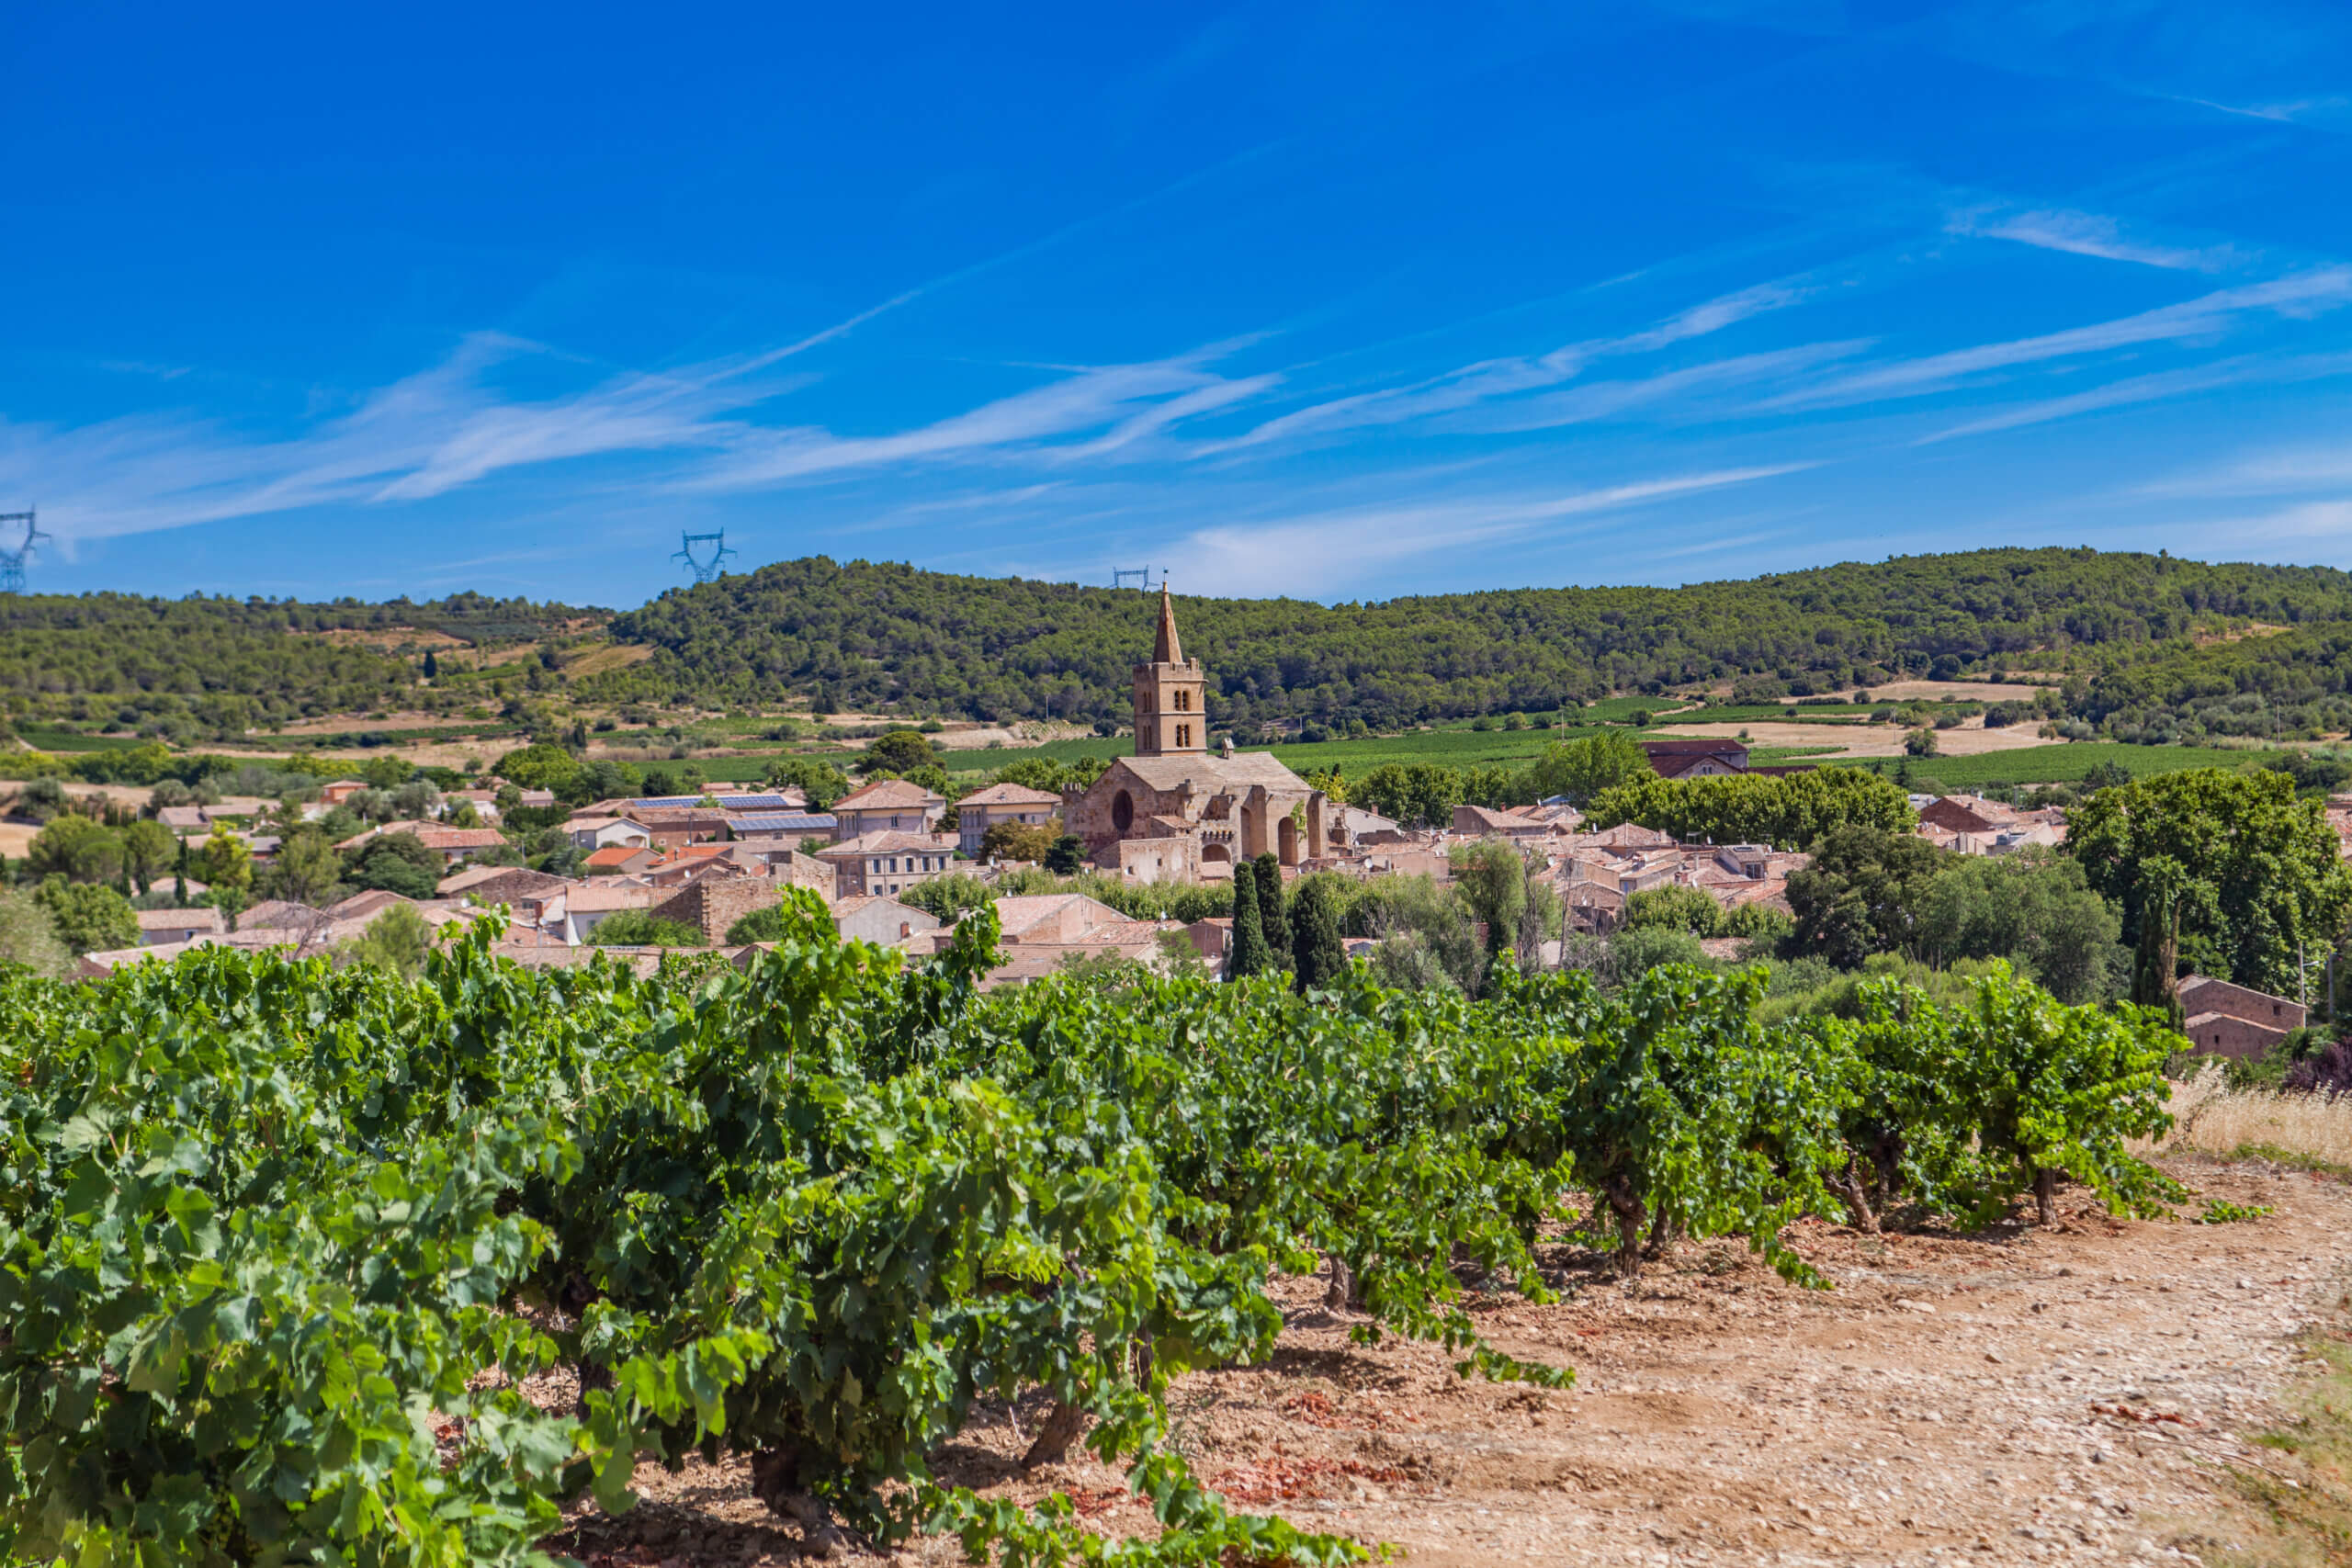 A day in Le Minervois